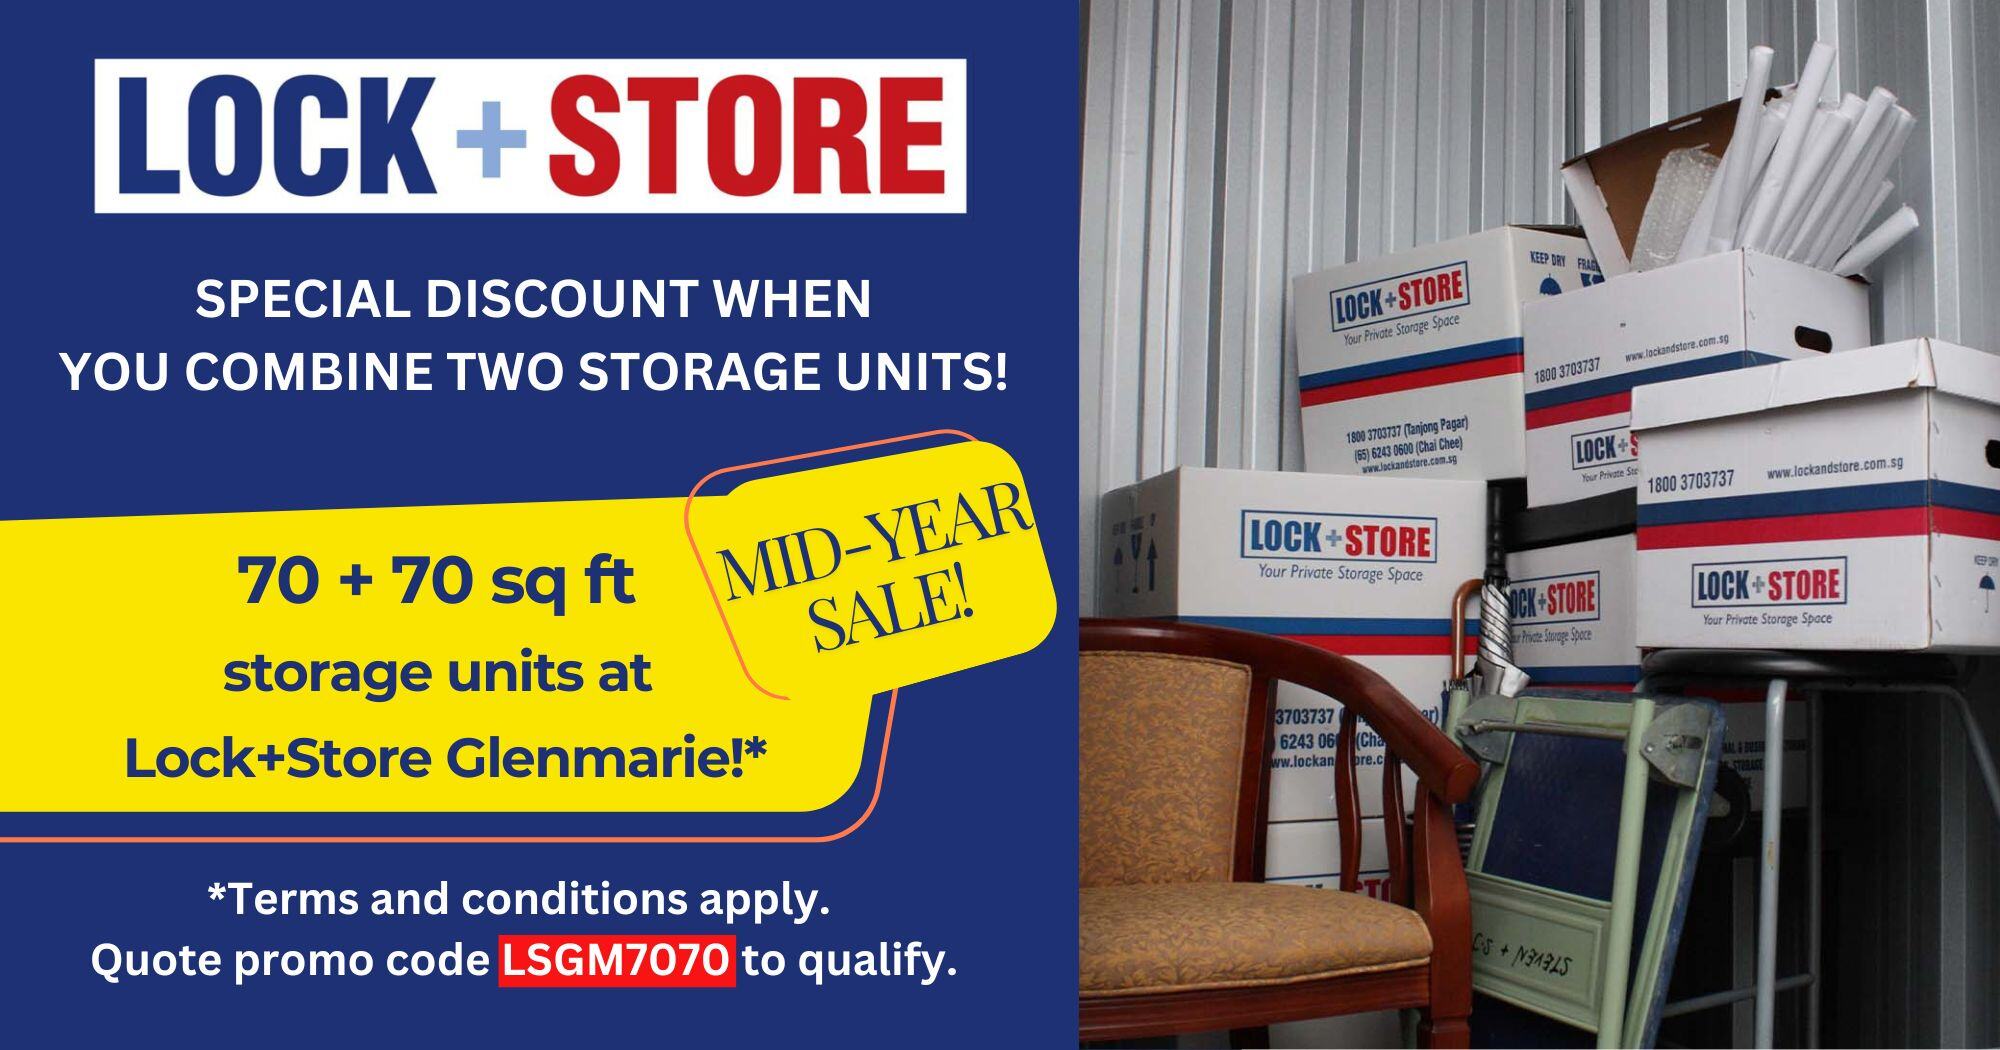 16 sqft locker at $48 per month! 24 sqft locker at $68 per month! Quote promo code LSTP4868 to qualify! Terms and conditions apply. Promo rates applicable to non-air con units at Lock+Store Tanjon (8)